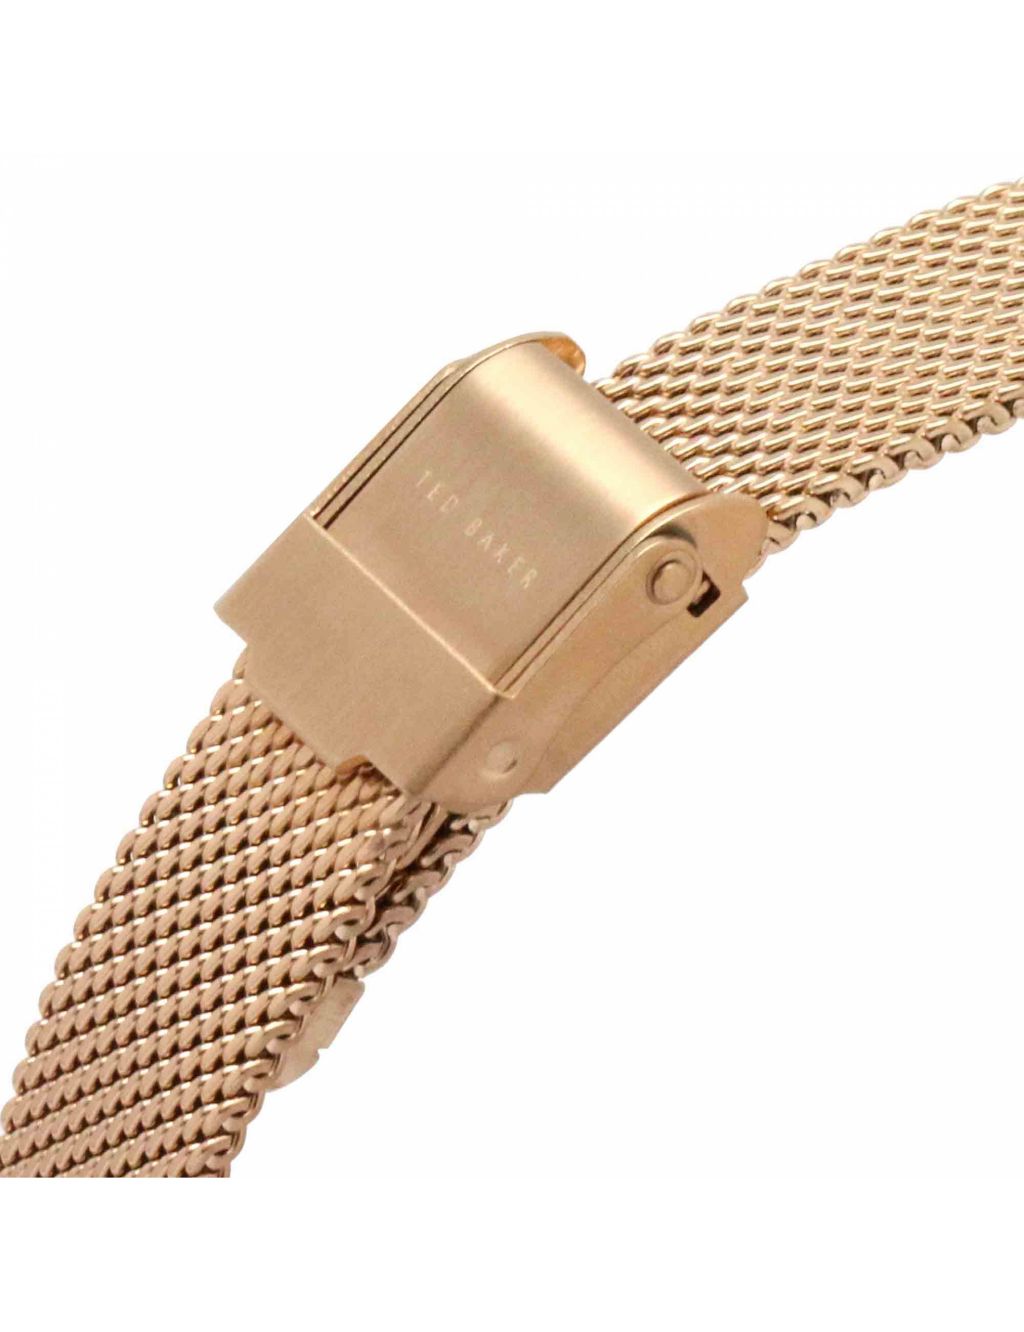 Ted Baker Ammy Floral Rose Gold Watch image 3